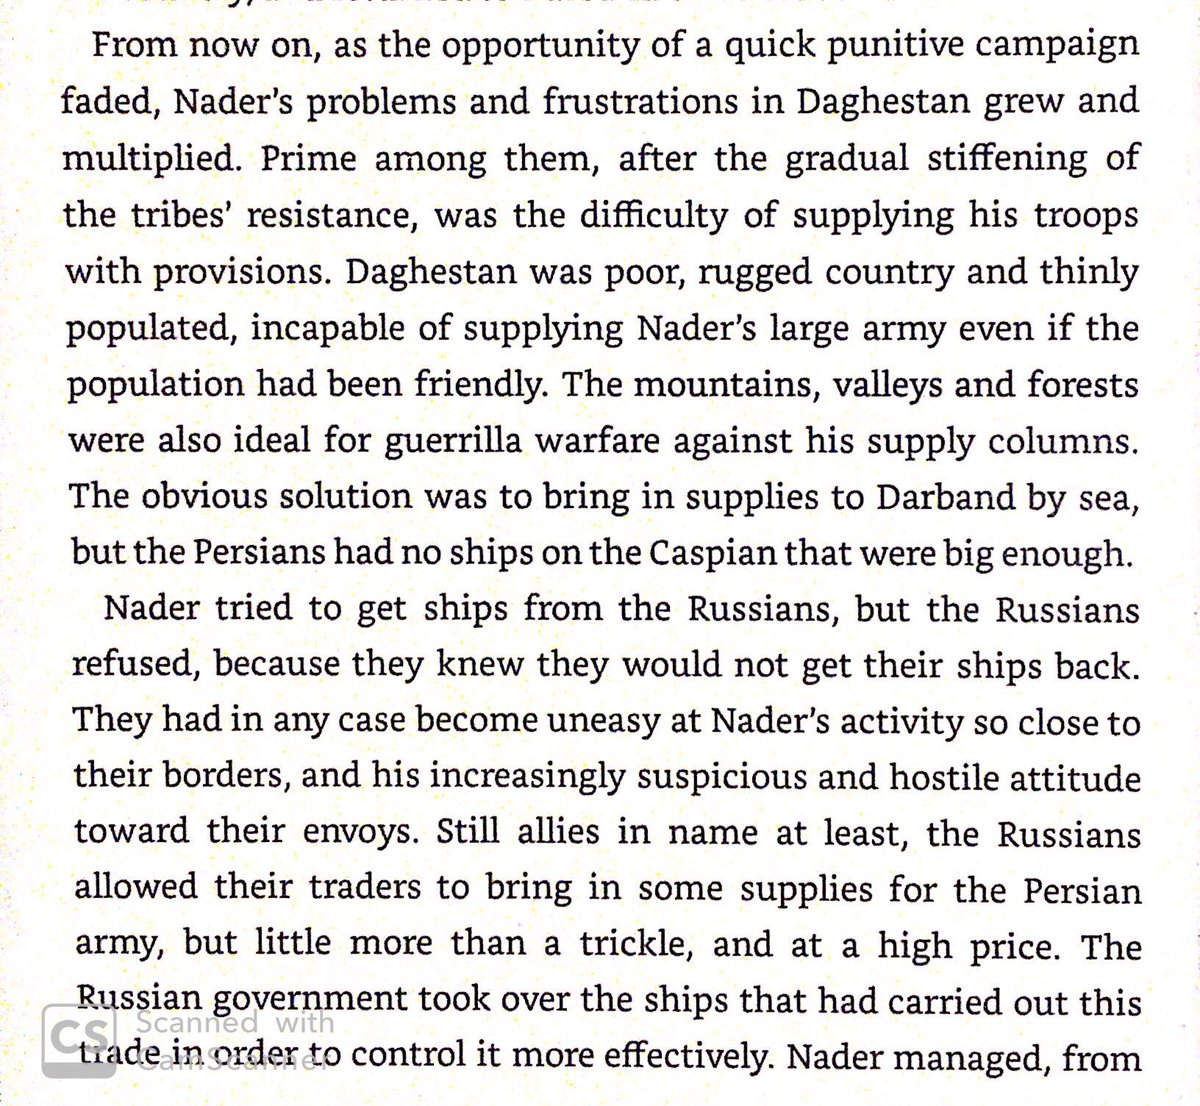 Campaigning in Dagestan was difficult- very mountainous, guerilla warfare, & uncooperative Russians. Even by mid-18th century, Russian ships dominated Caspian Sea trade.